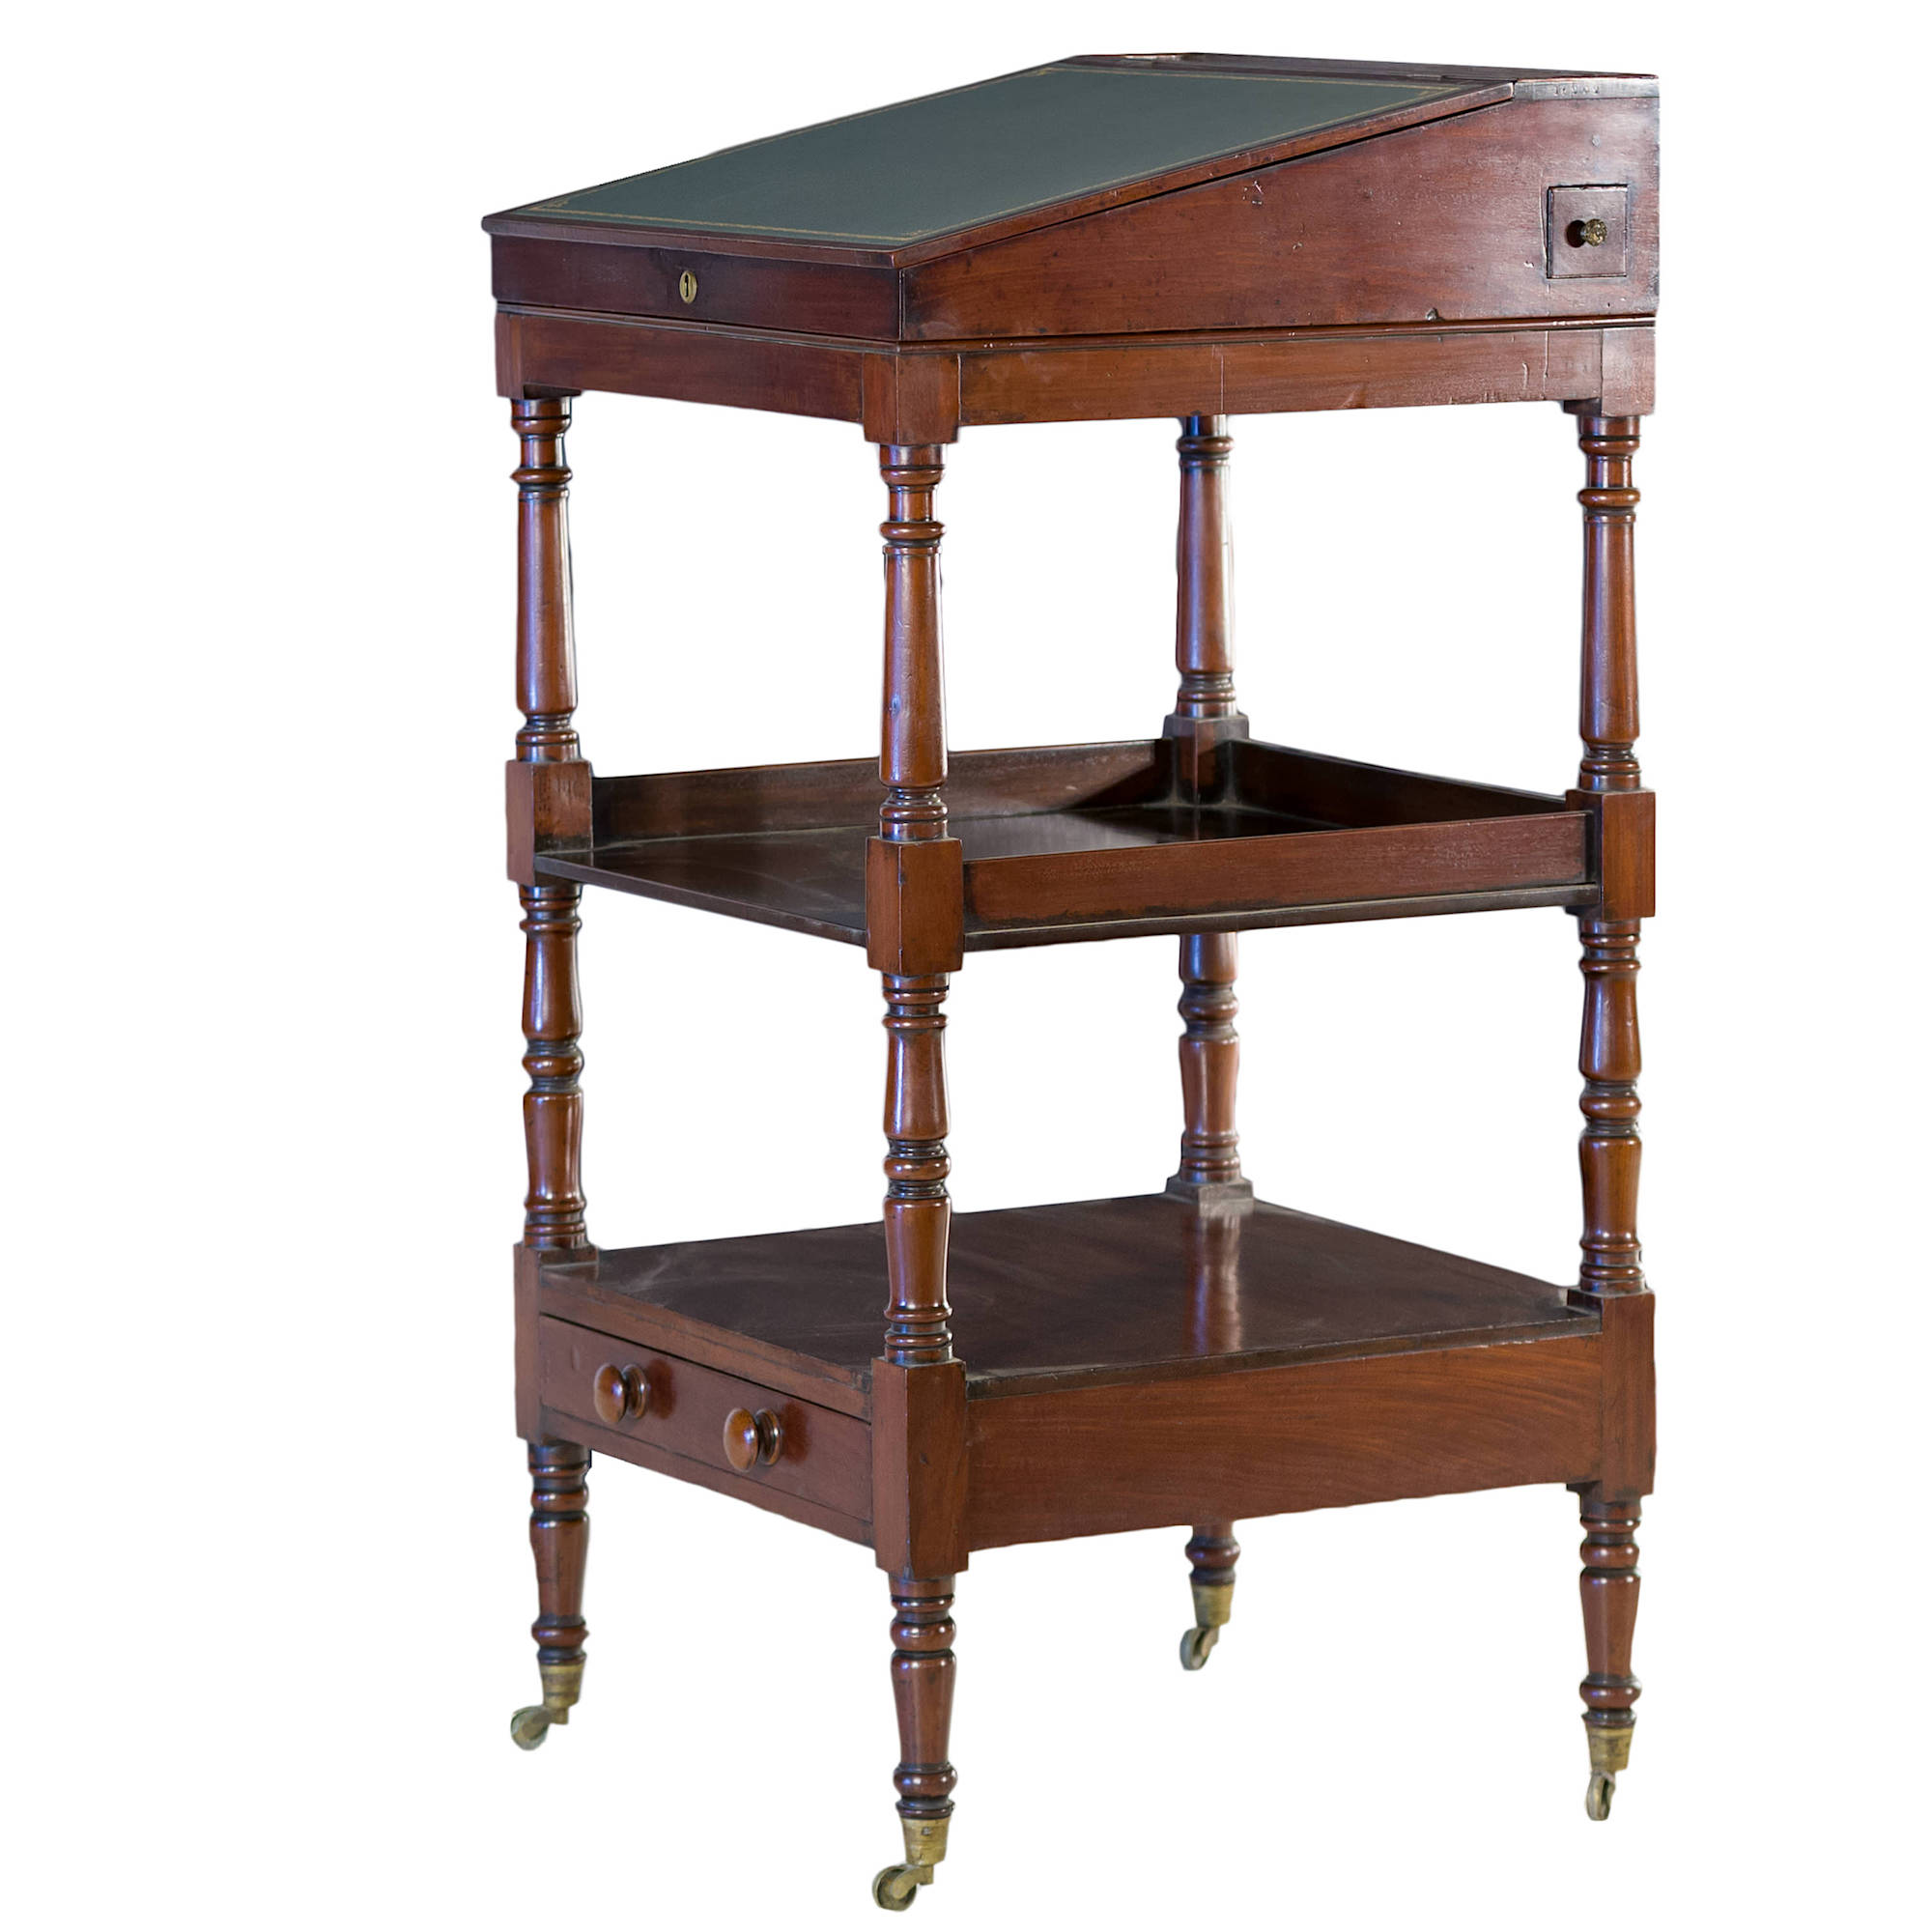 'William IV Mahogany Tellers Desk with Gilt Tooled Leather Top Circa 1835'